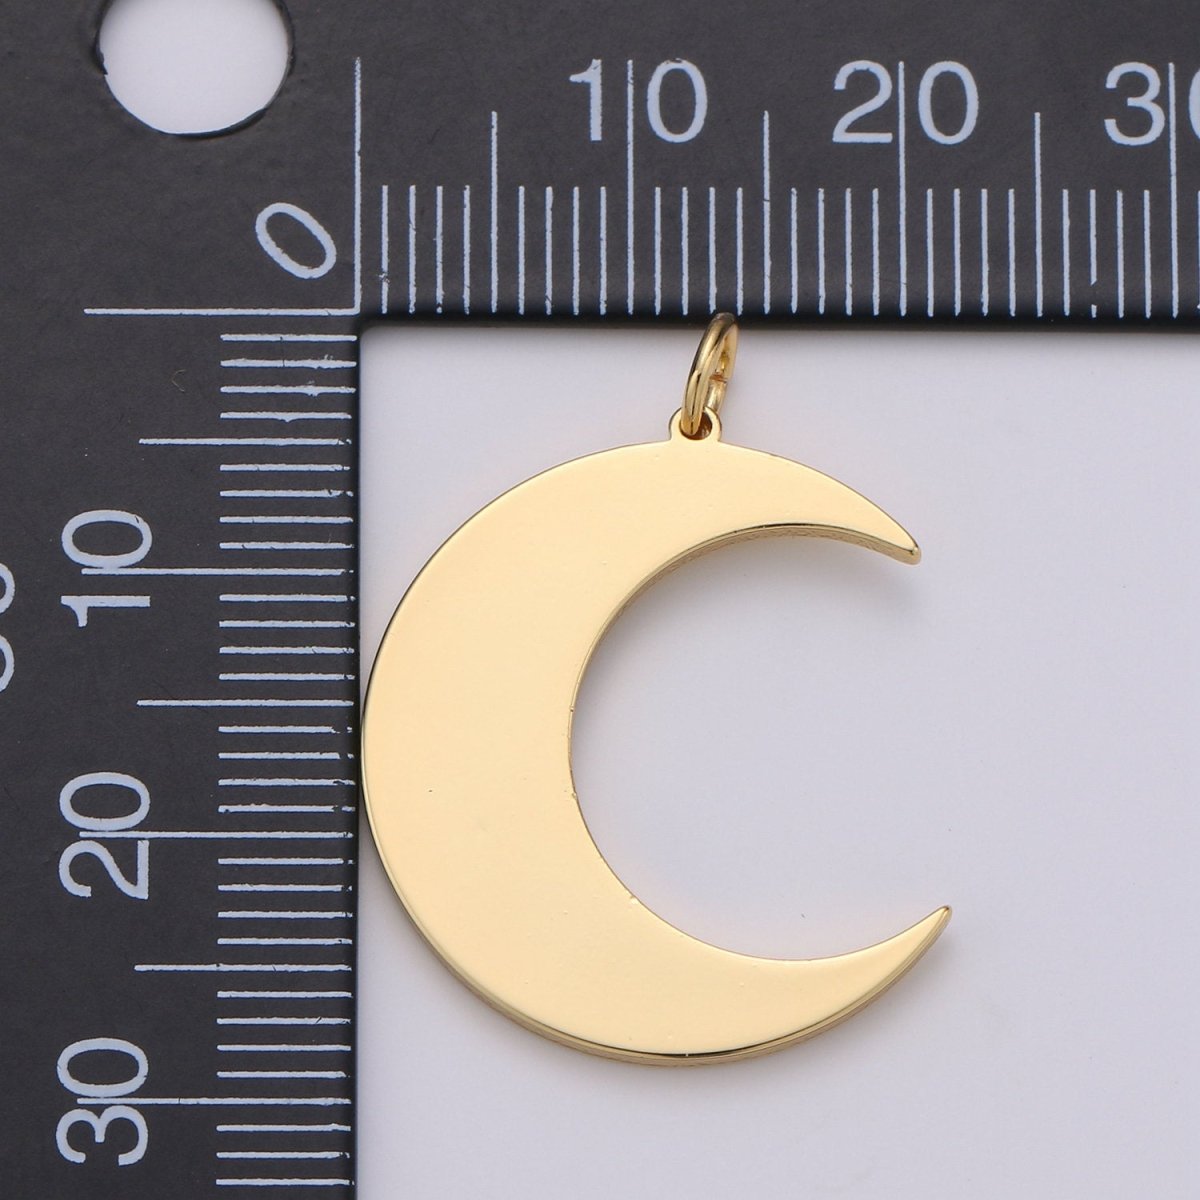 Dainty 14k Gold Filled Moon charm - Gold Moon pendant - Crescent Moon pendant for Necklace Bracelet Earring Charm Supply Celestial Jewelry D-479 - DLUXCA